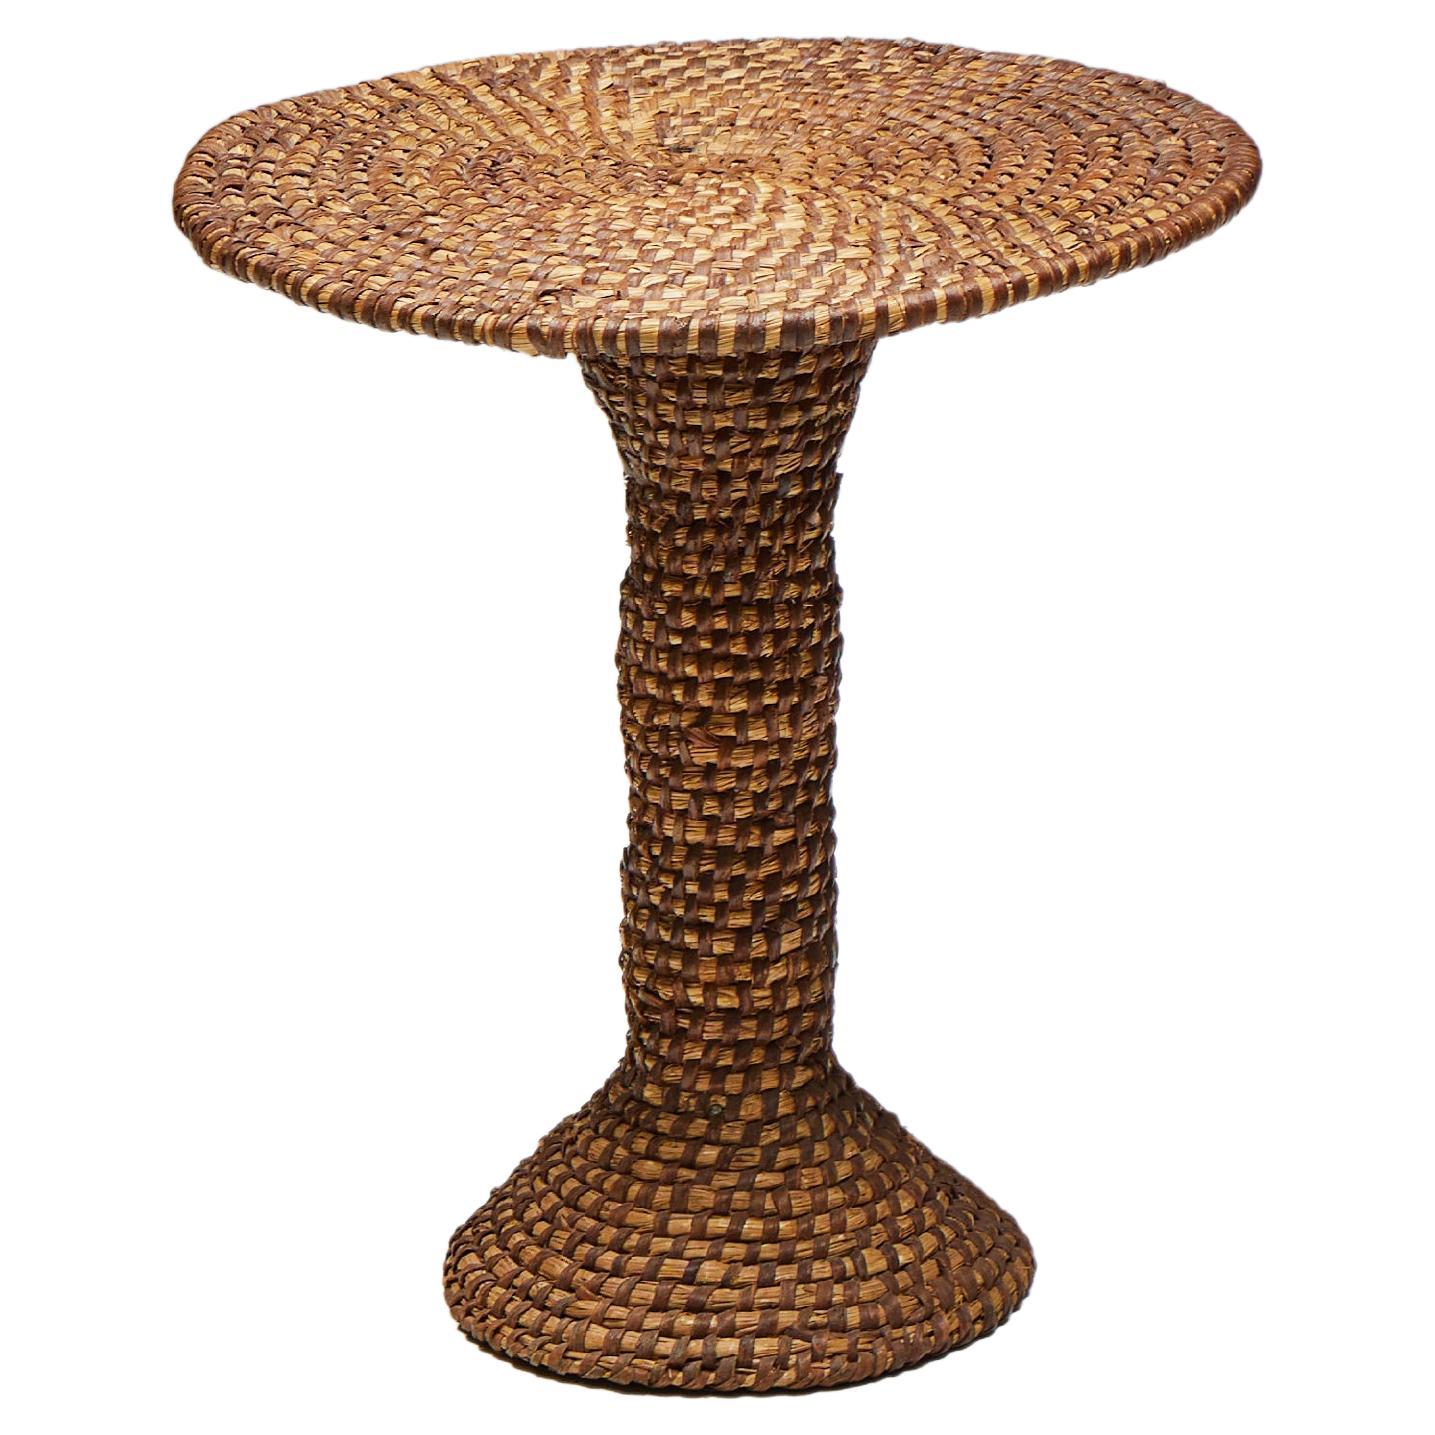 Art Populaire Side Table in Rye Straw, France, Early 20th Century  For Sale